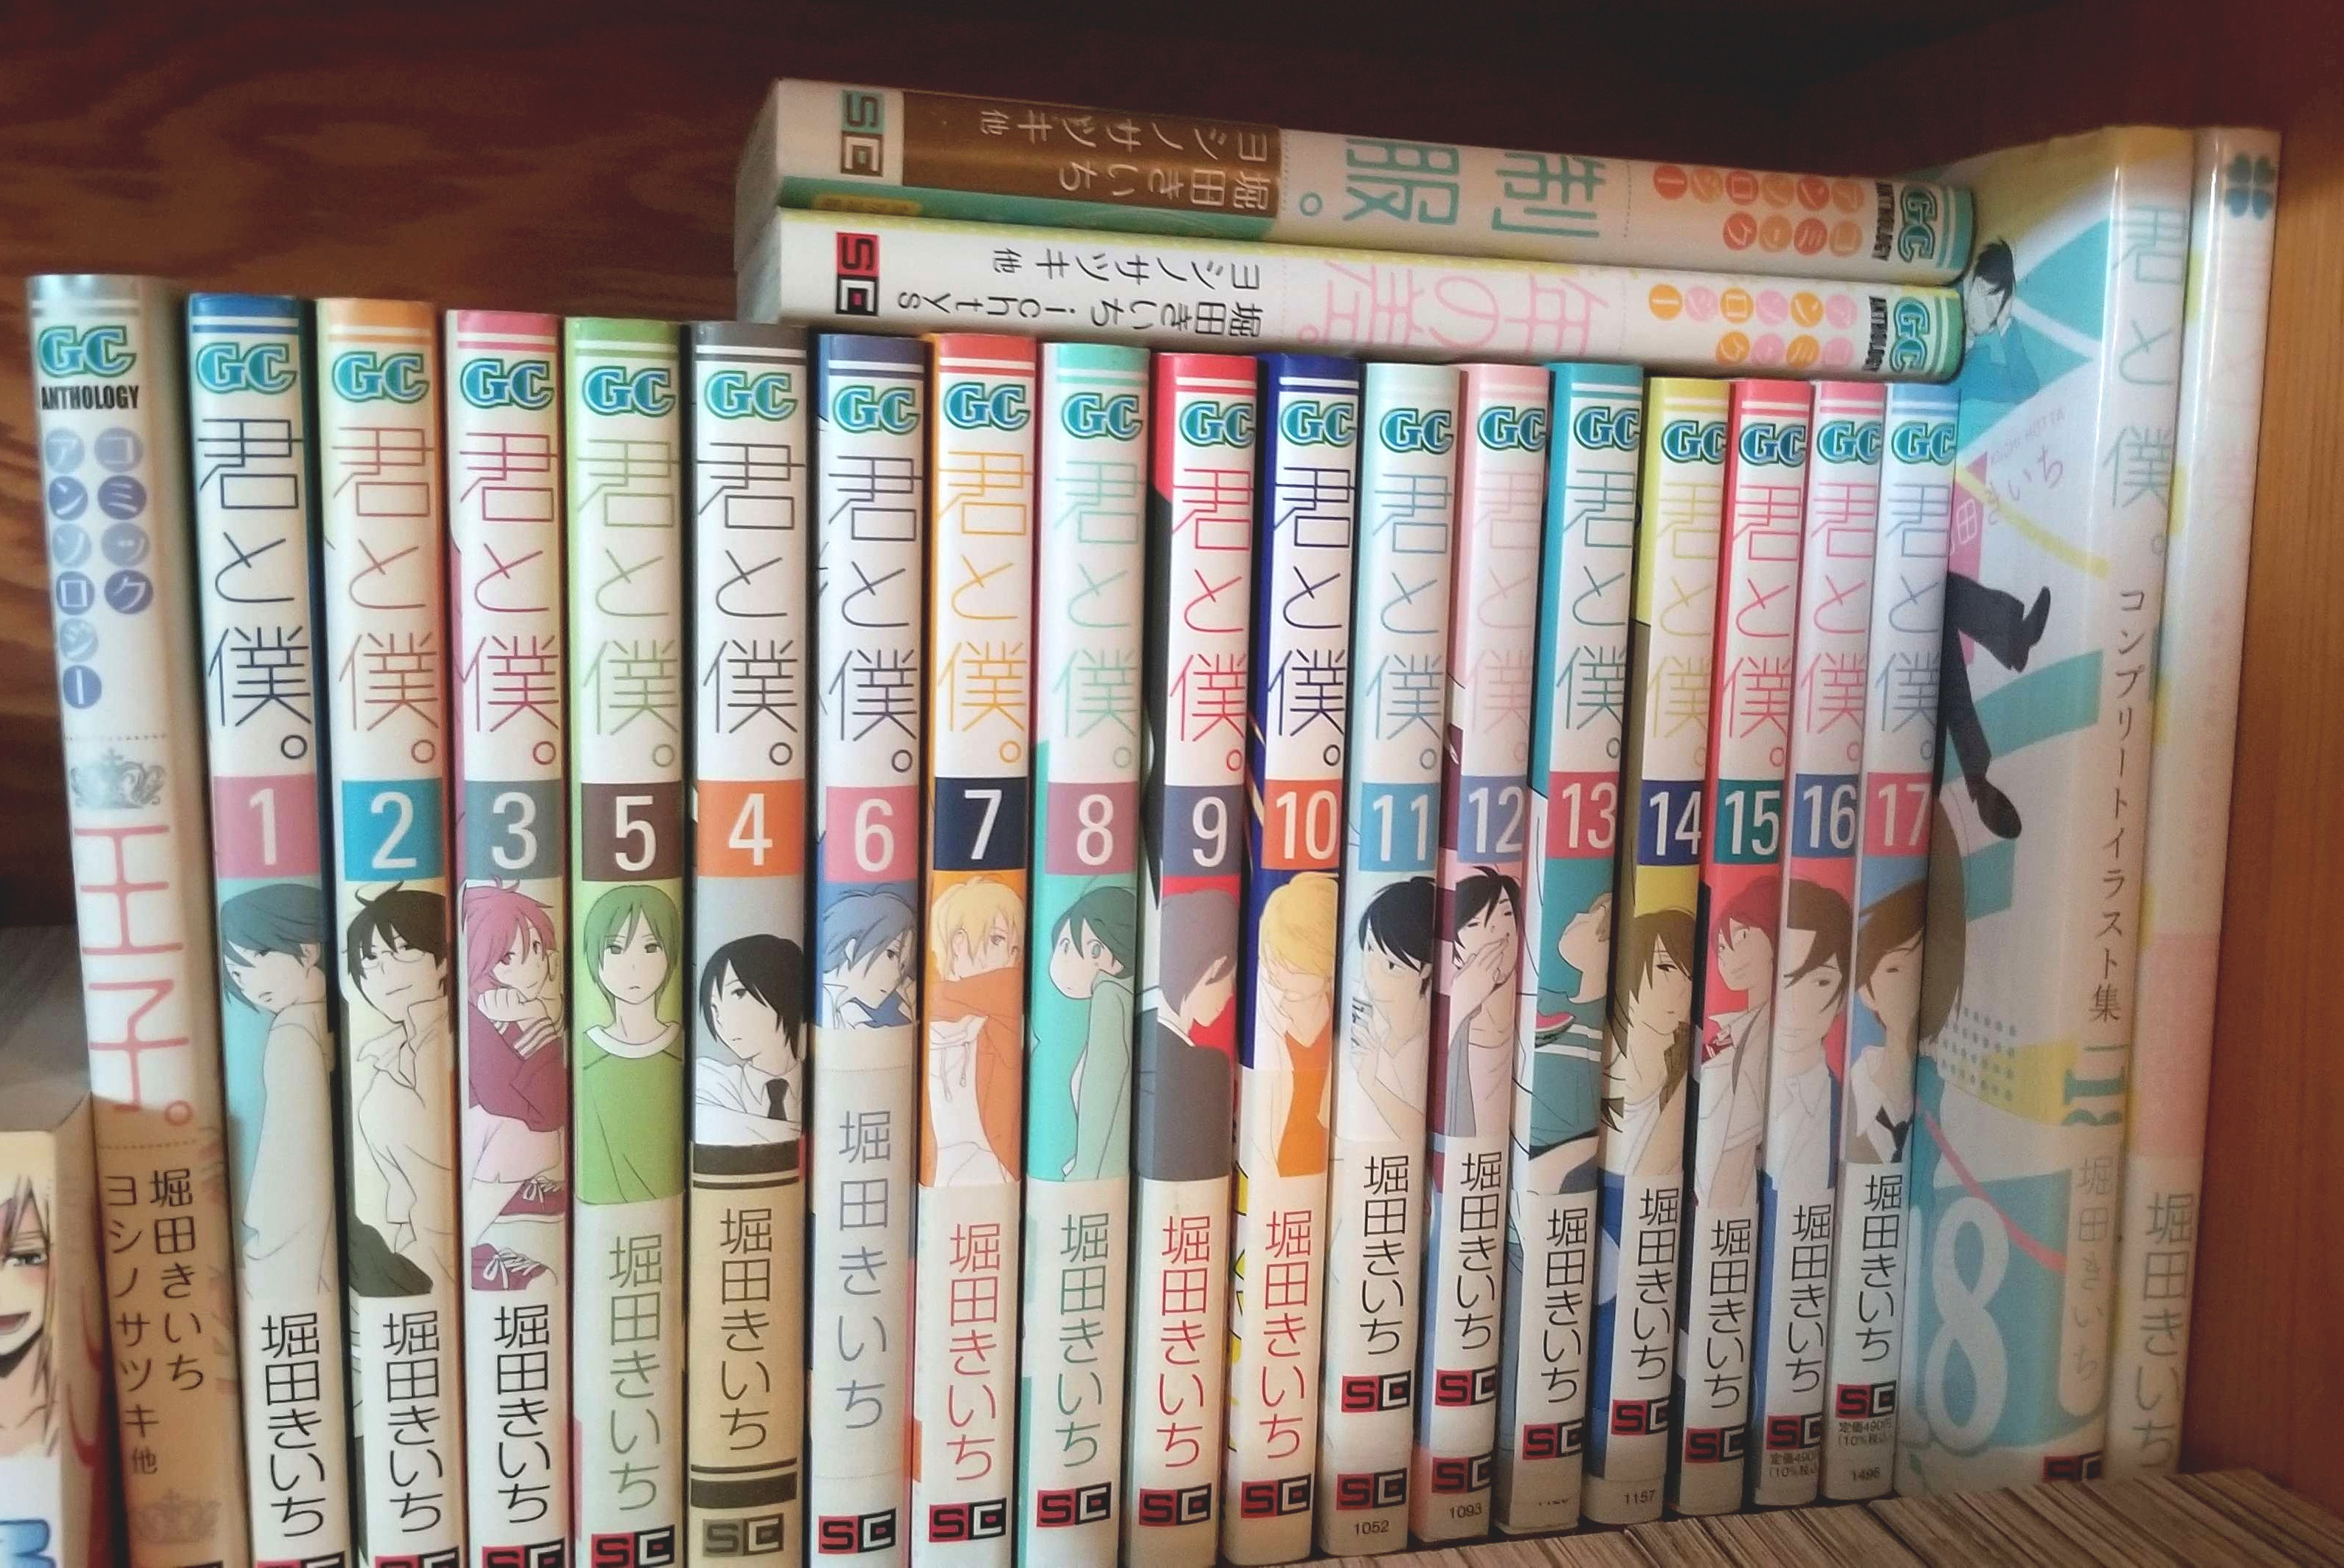 My collection of Kimi to Boku manga, lined up in numerical order.